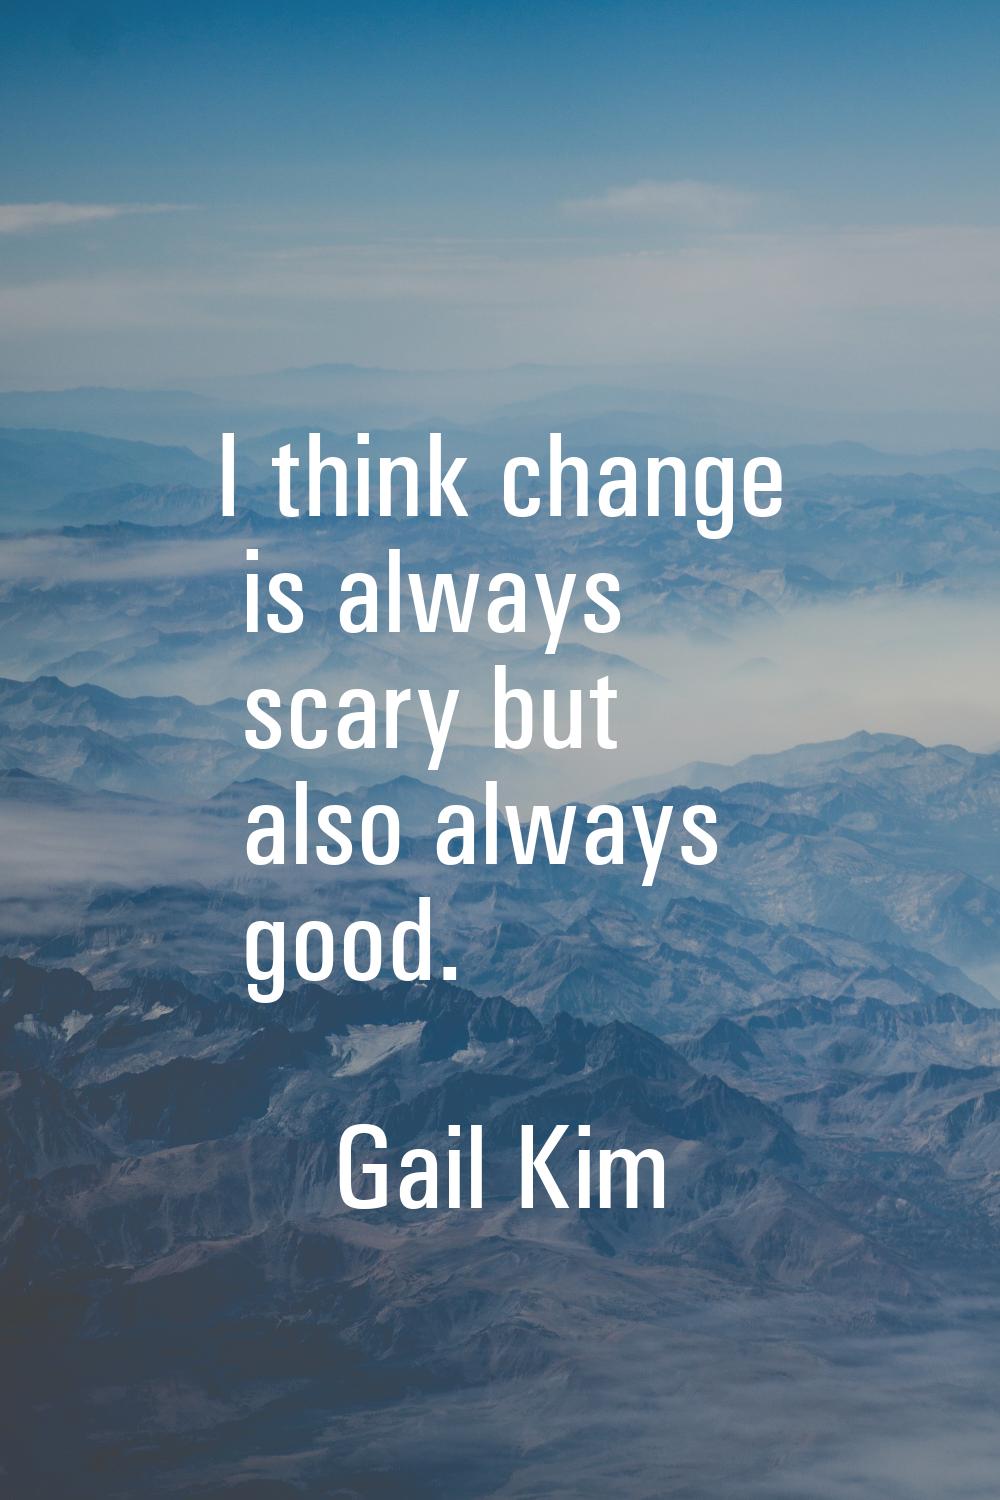 I think change is always scary but also always good.